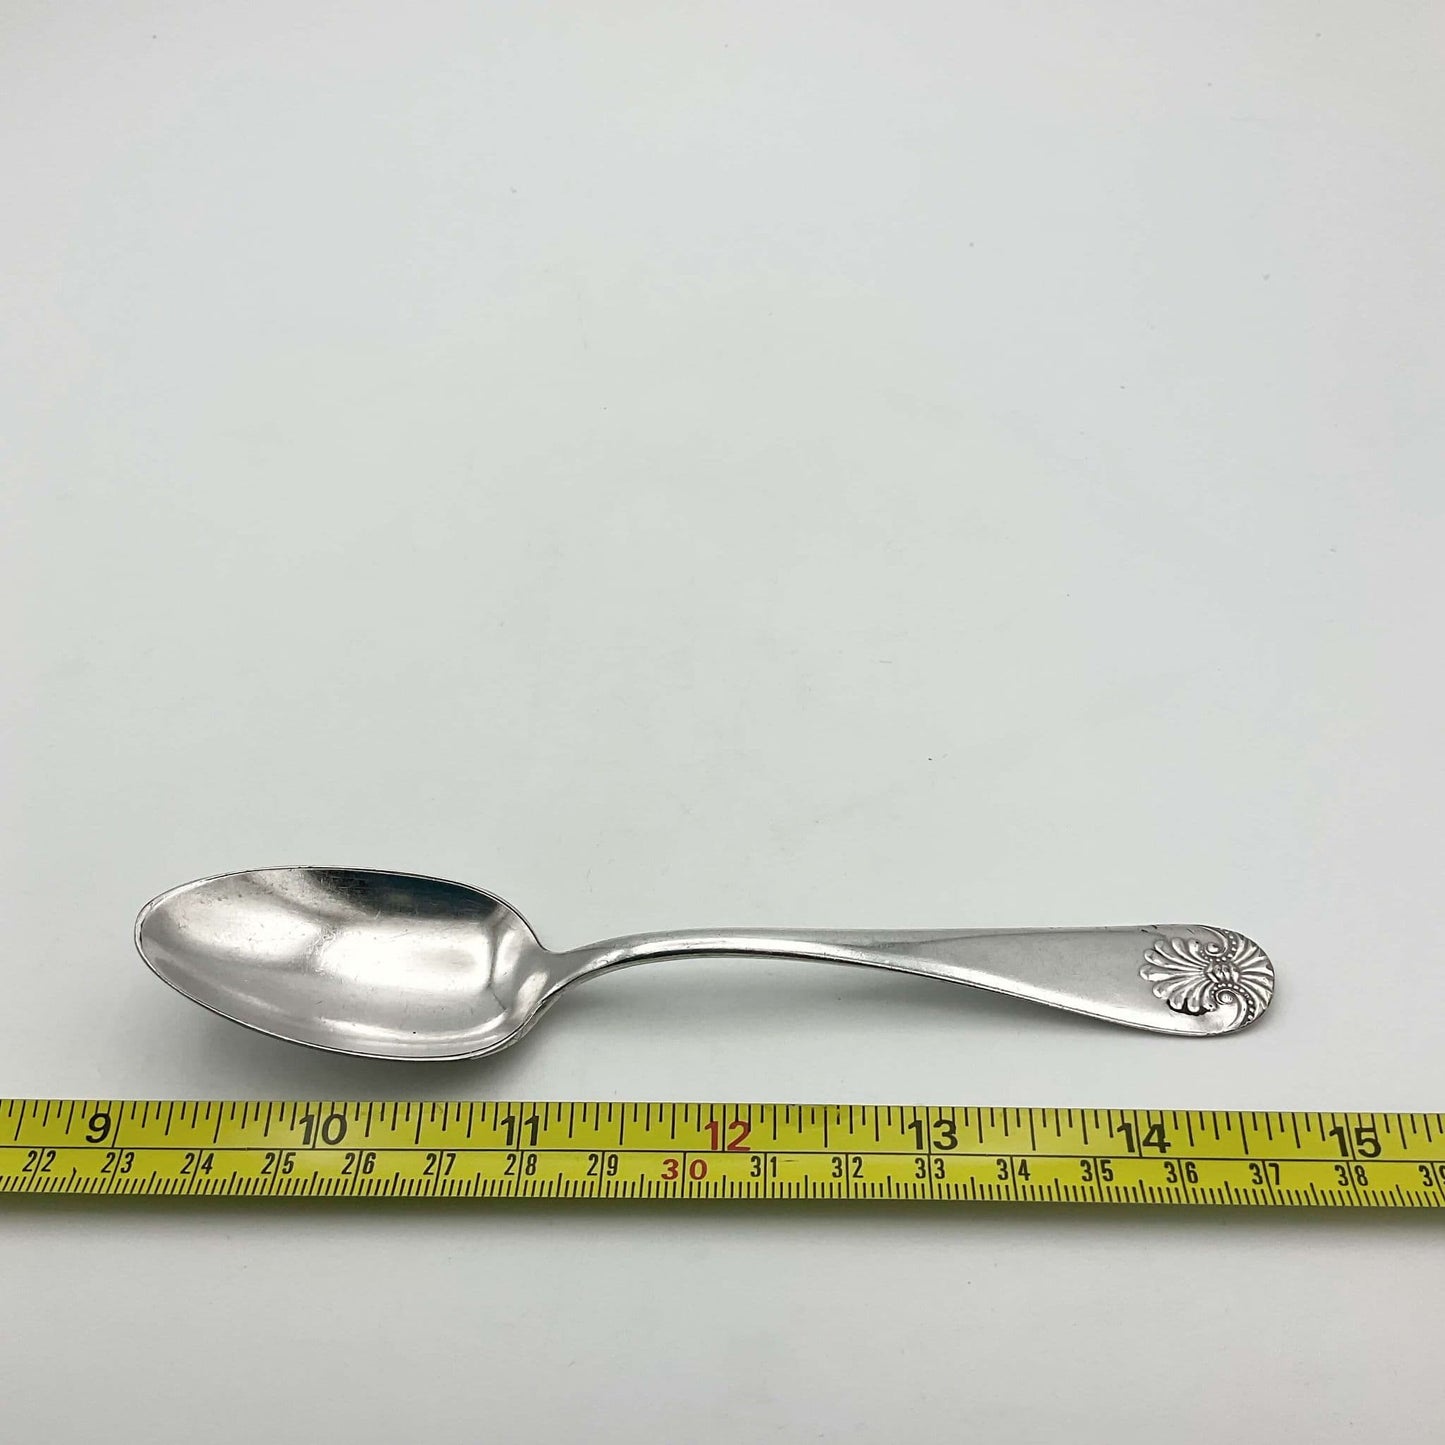 Towle Manufacturing Silver Plated Spoon, Benjamin Franklin Design